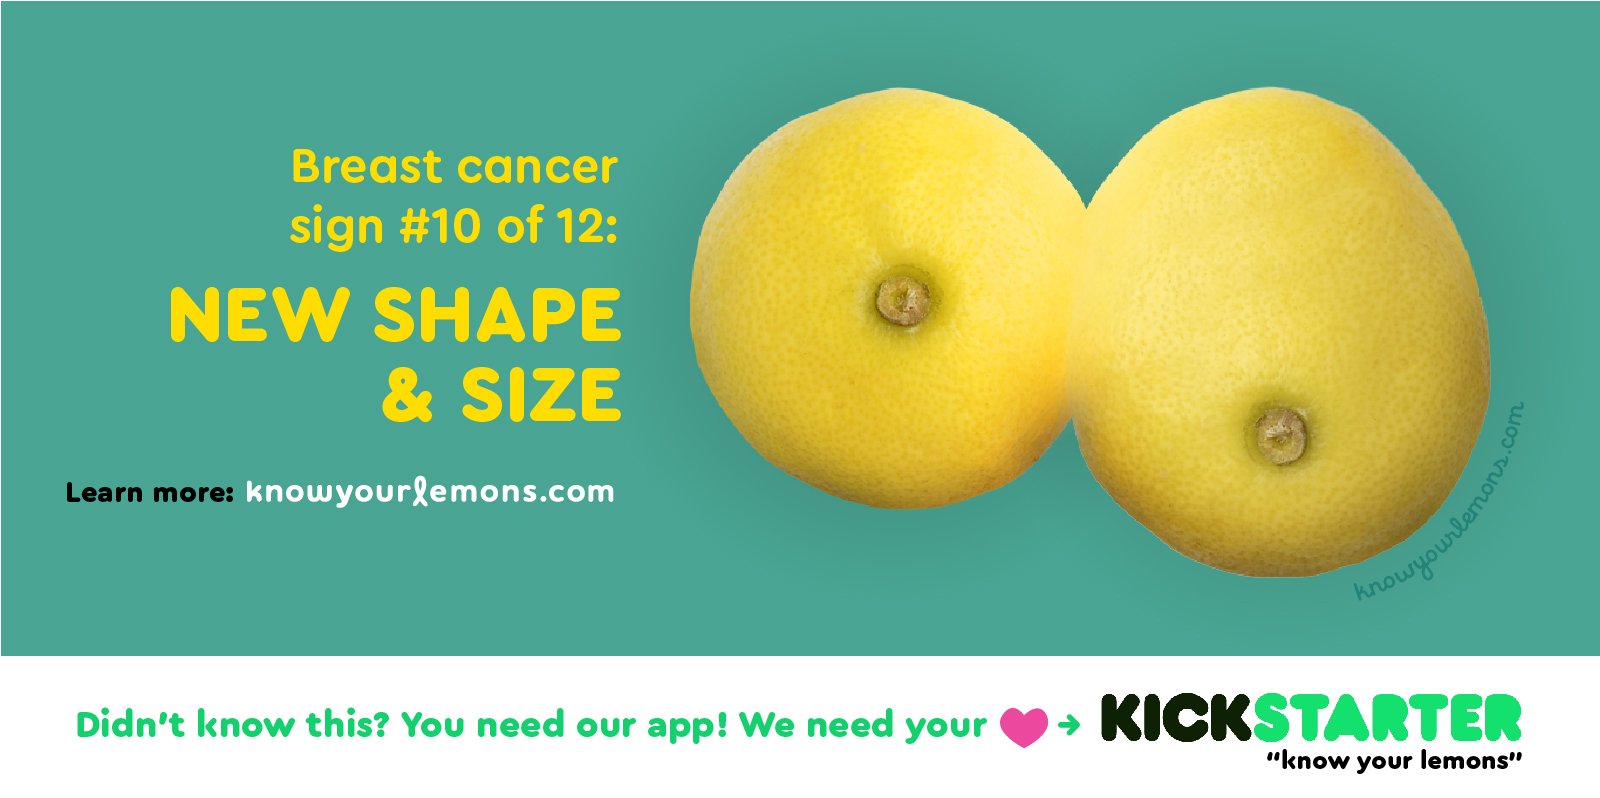 Breast Cancer Awareness Month: Get to know your lemons